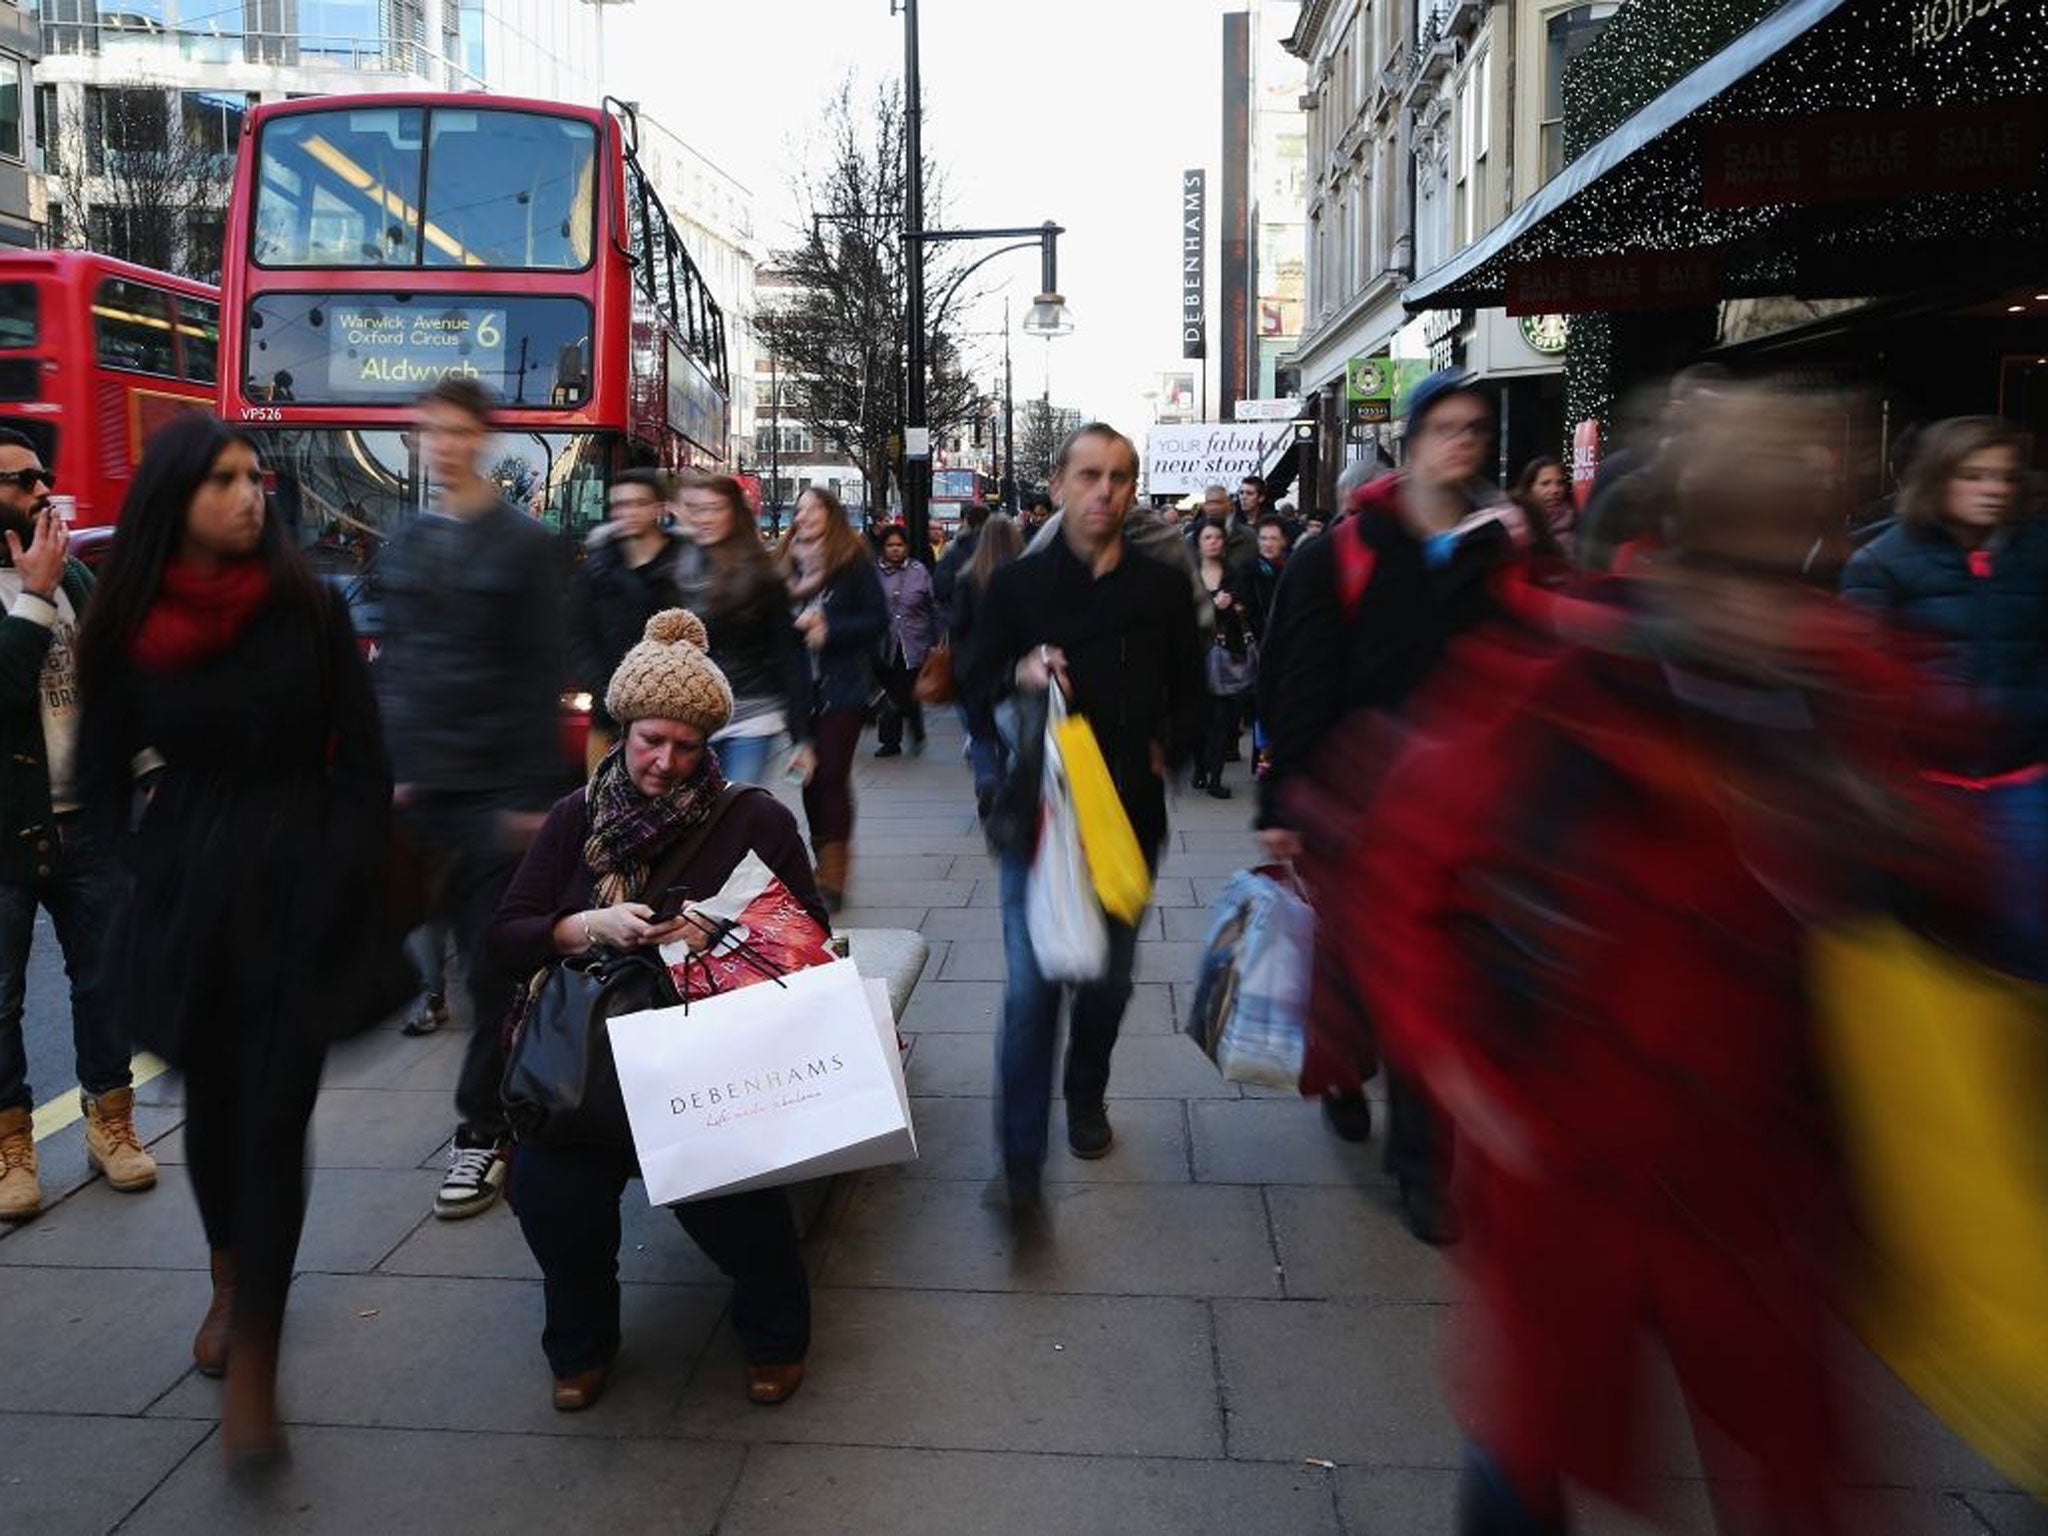 Oxford Street in London yesterday was full of shoppers, but another debt bubble could be looming